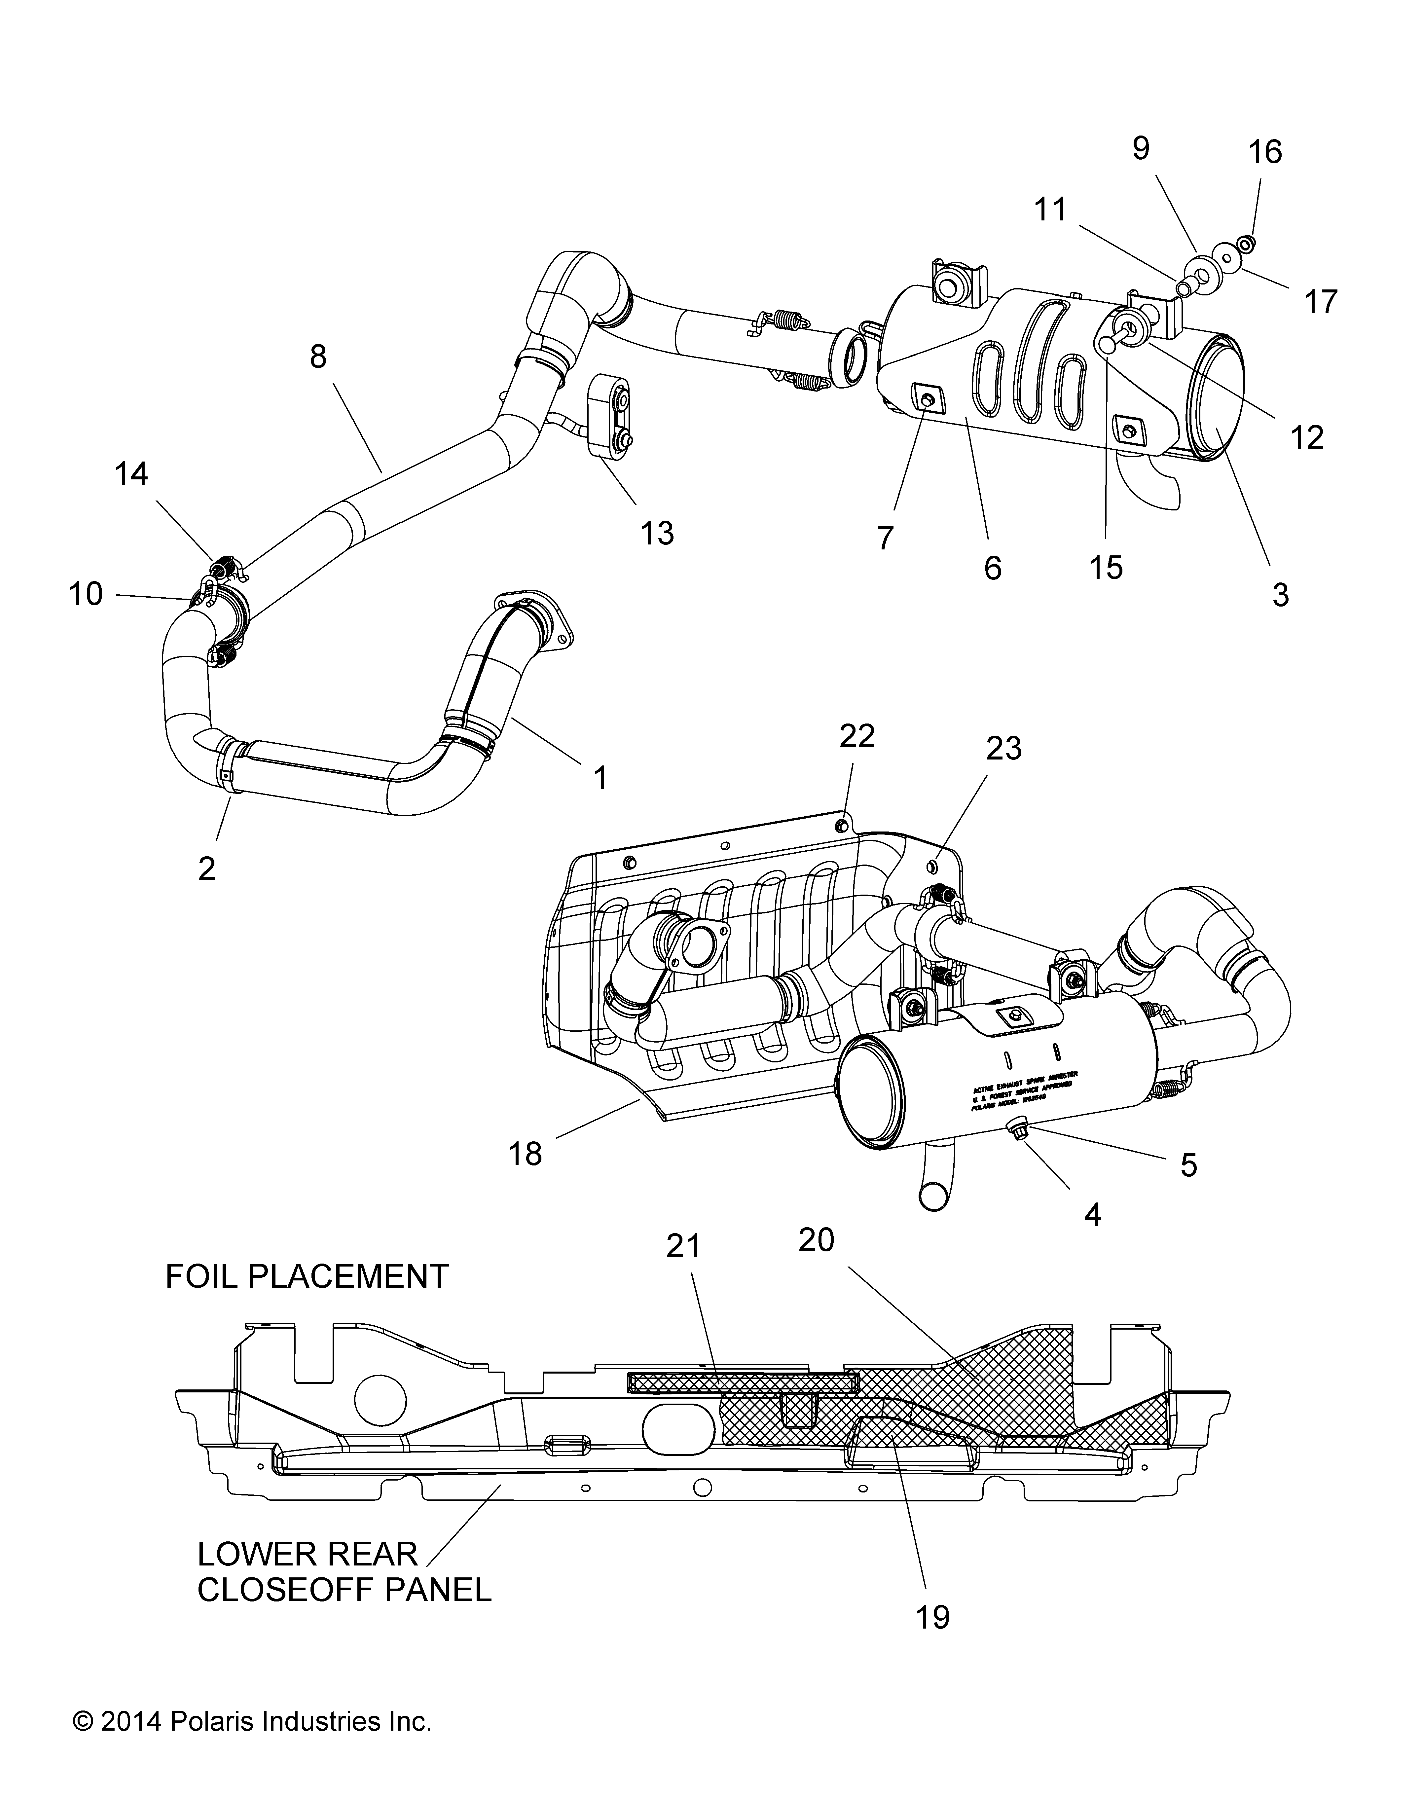 Part Number : 1262581 MIDPIPE DIESEL ASSEMBLY